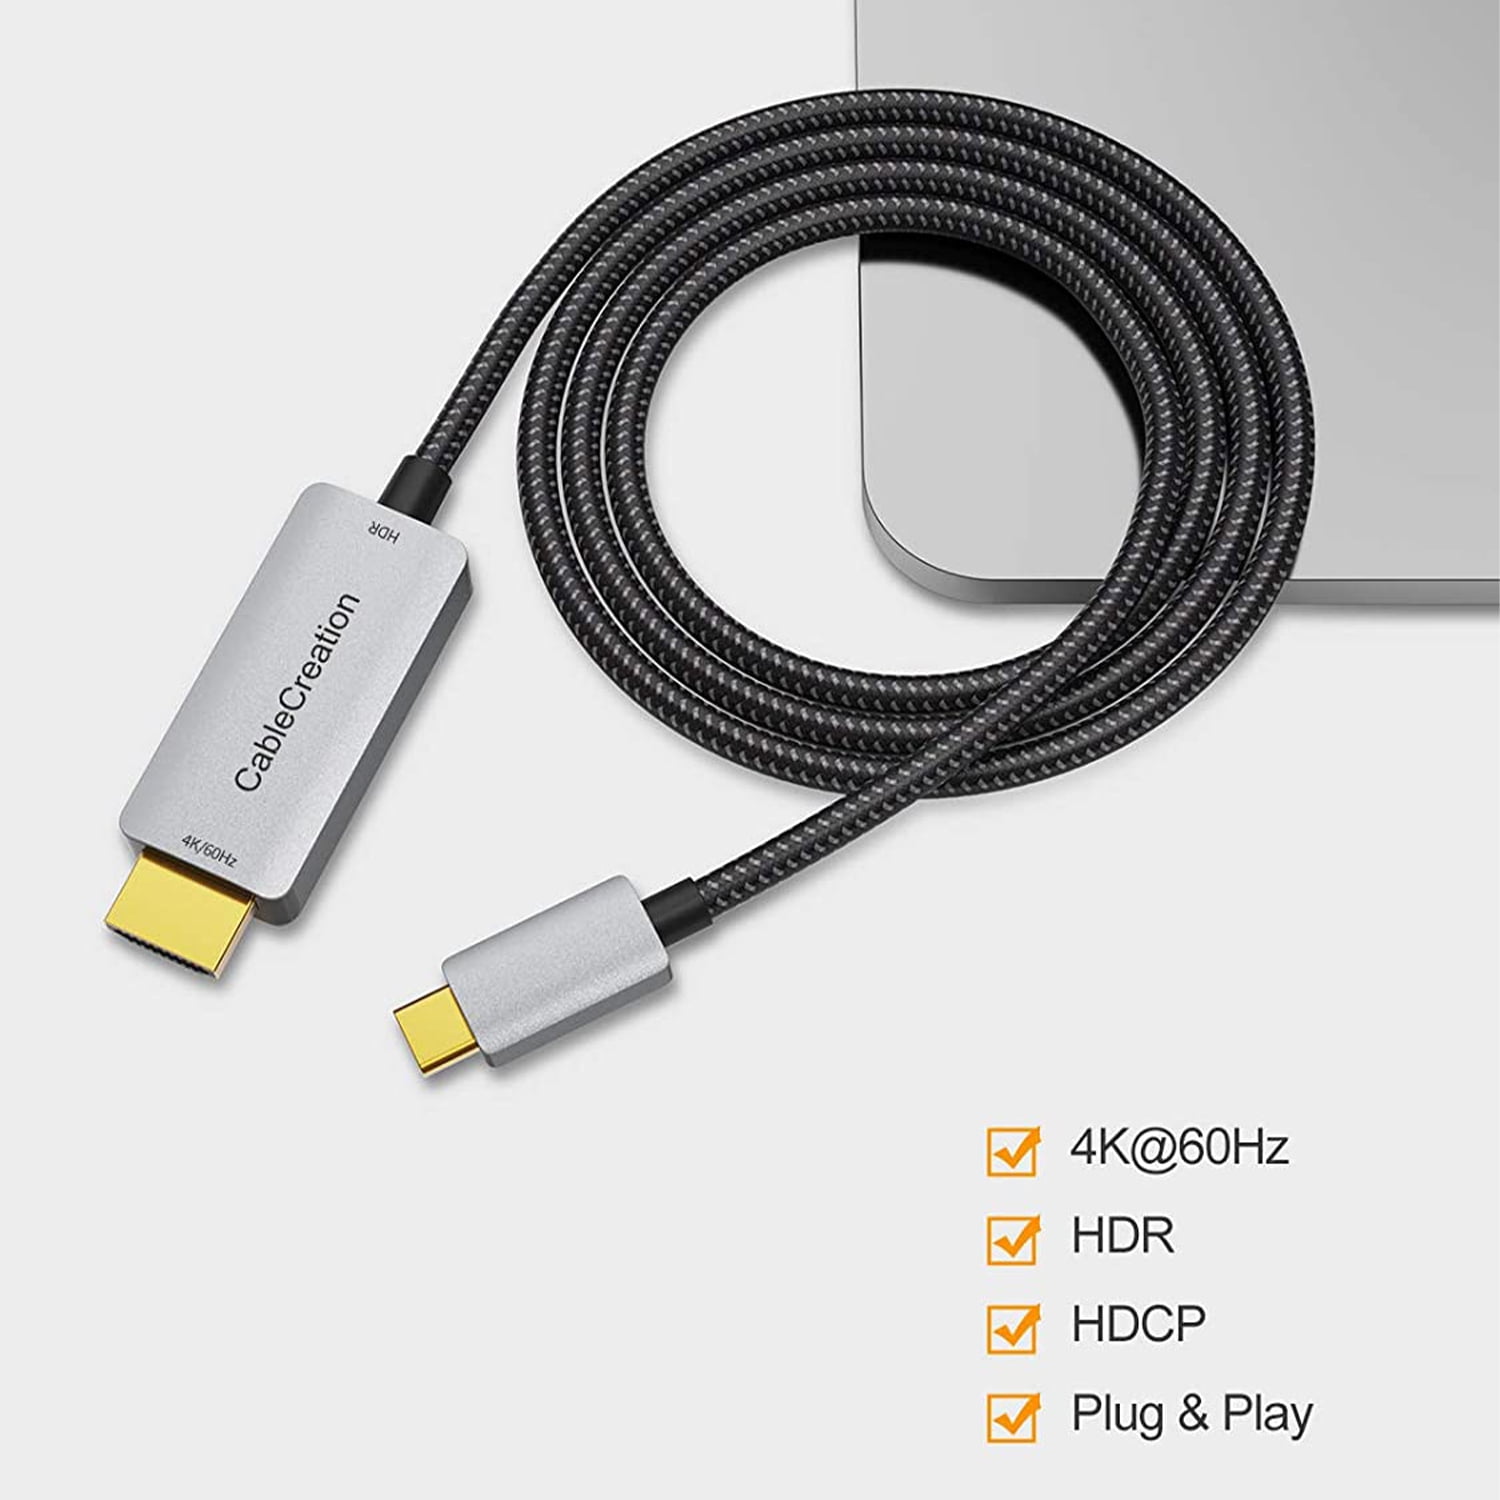 filosof Forfærdeligt femte USB C to HDMI Cable 6FT with HDR 4K@60Hz, 2K@144Hz, 2K@120Hz, CableCreation  USB Type C to HDMI Cable Thunderbolt 3 Compatible for MacBook Pro/Air,  iMac, iPad Pro 2020, Galaxy S20 S10/Note 10 -